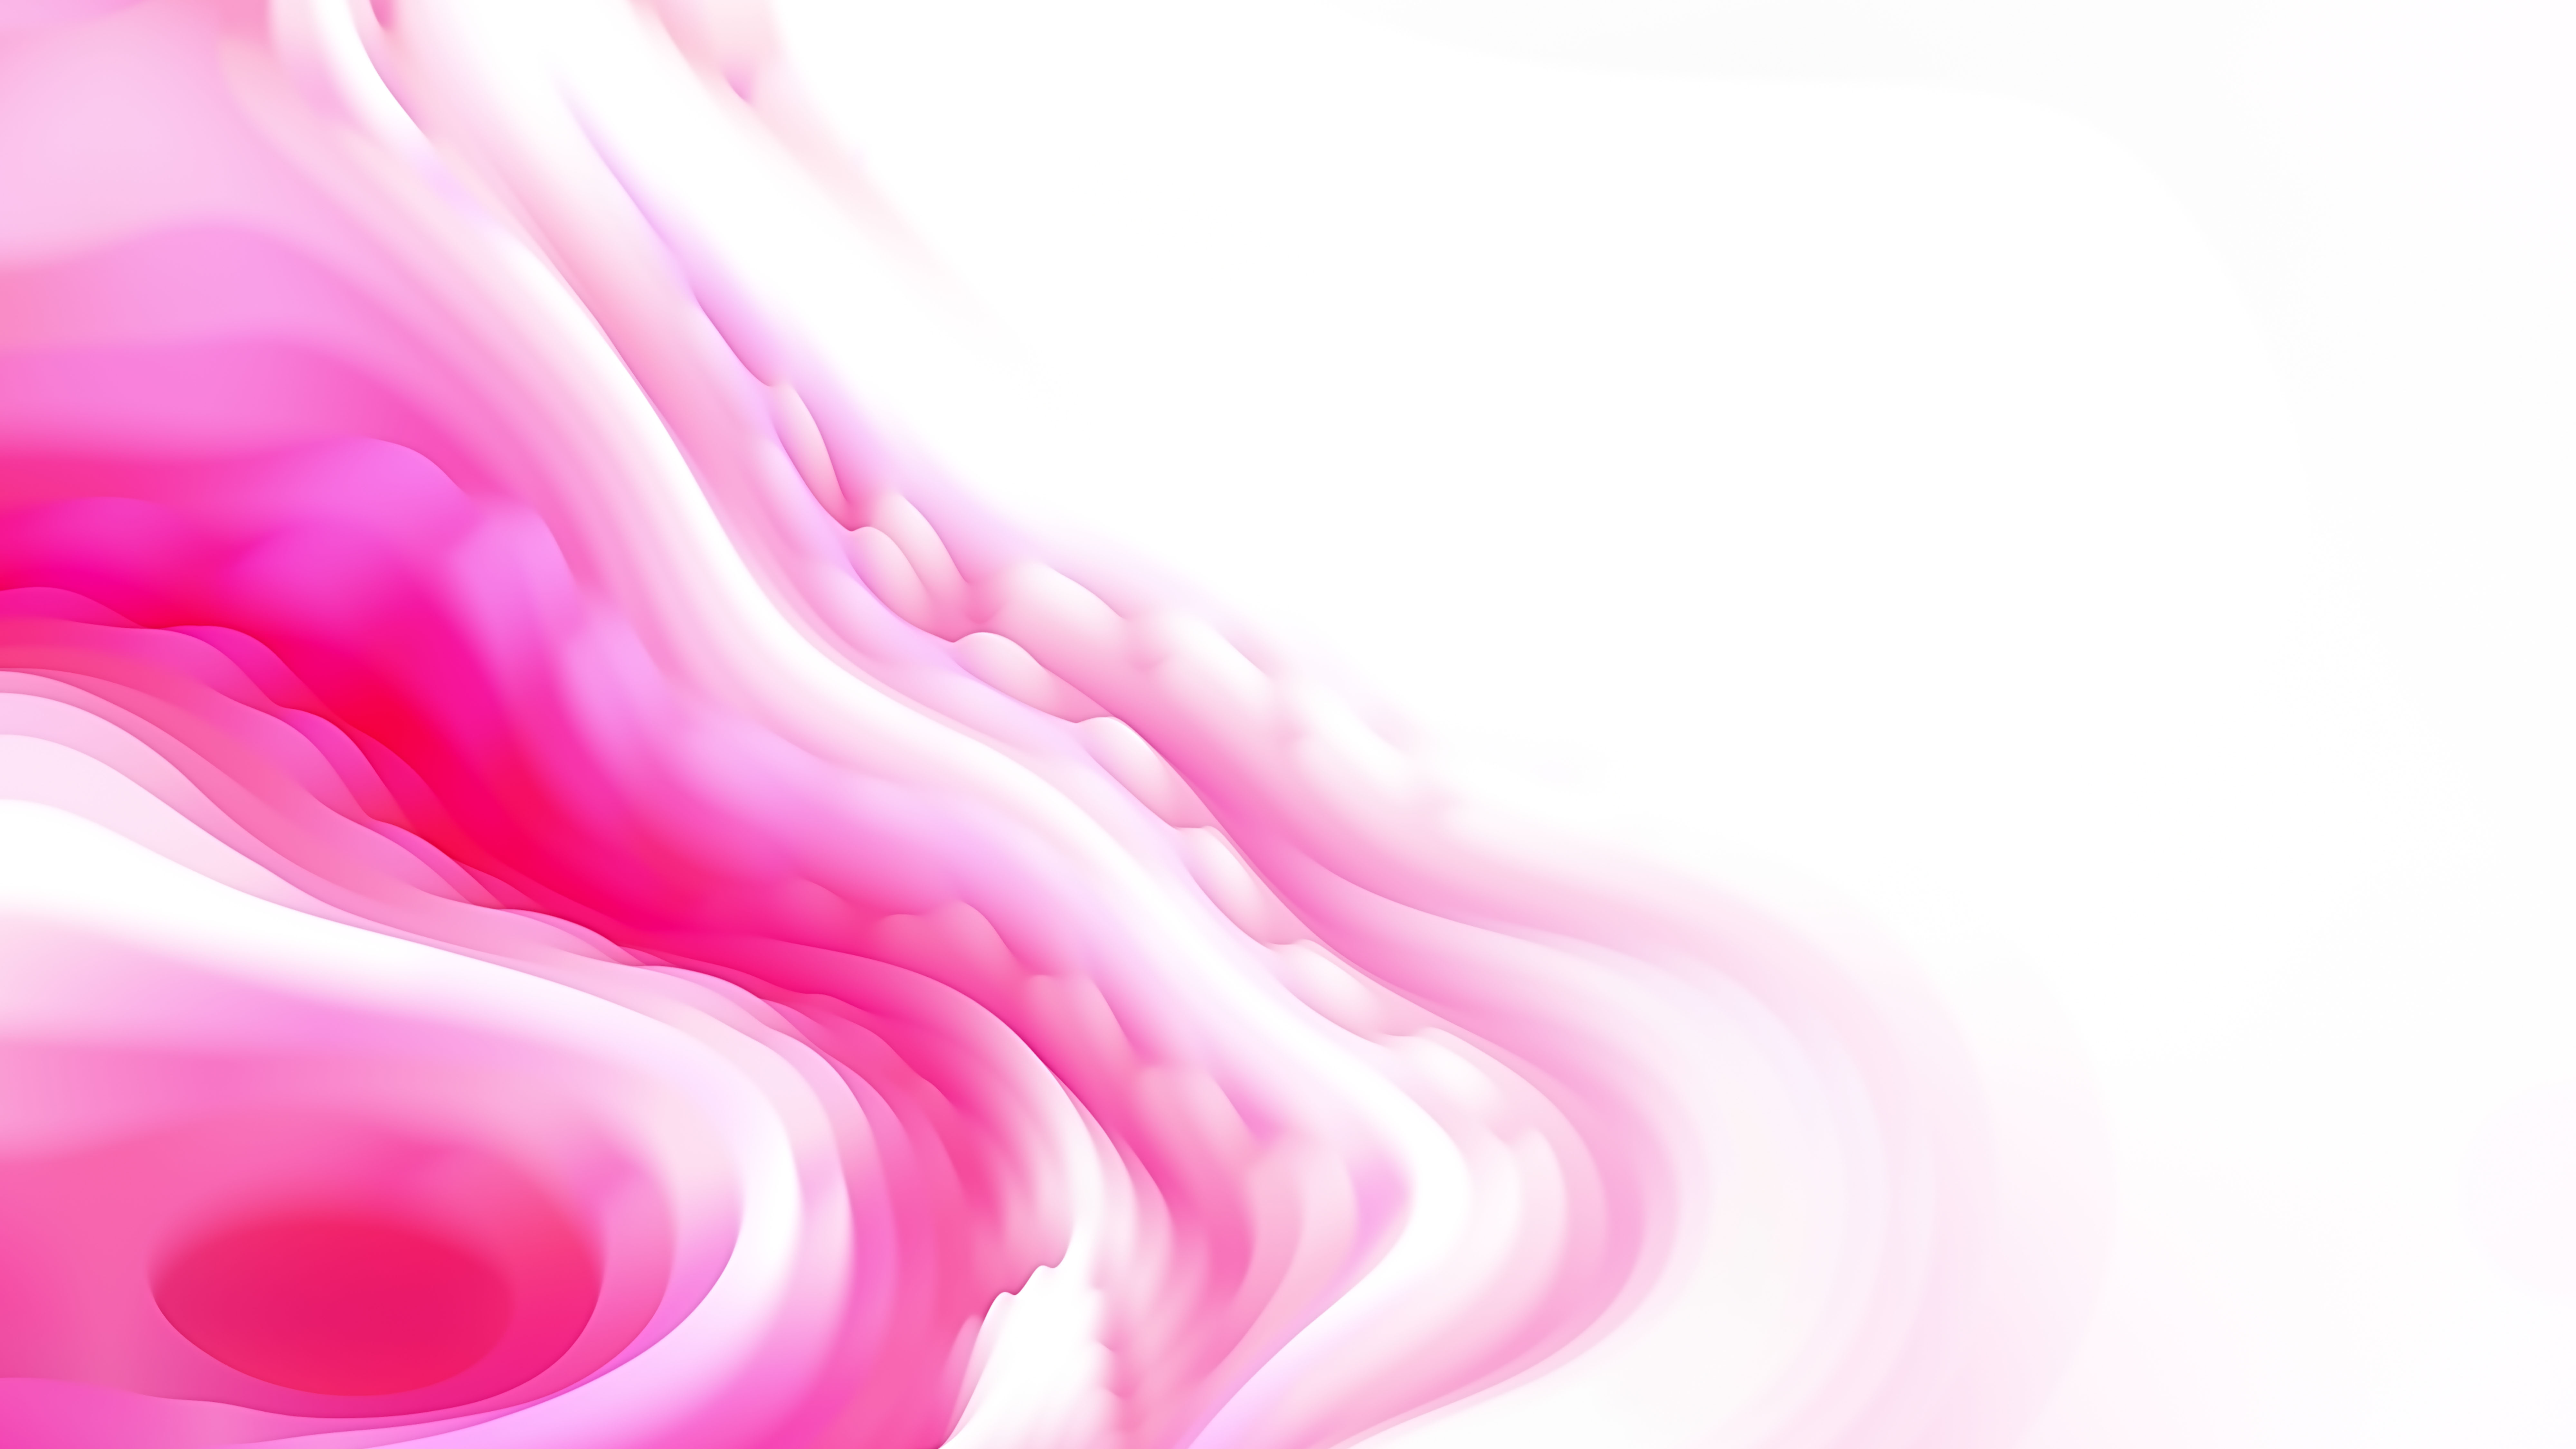 Free Pink and White Abstract Texture Background Design